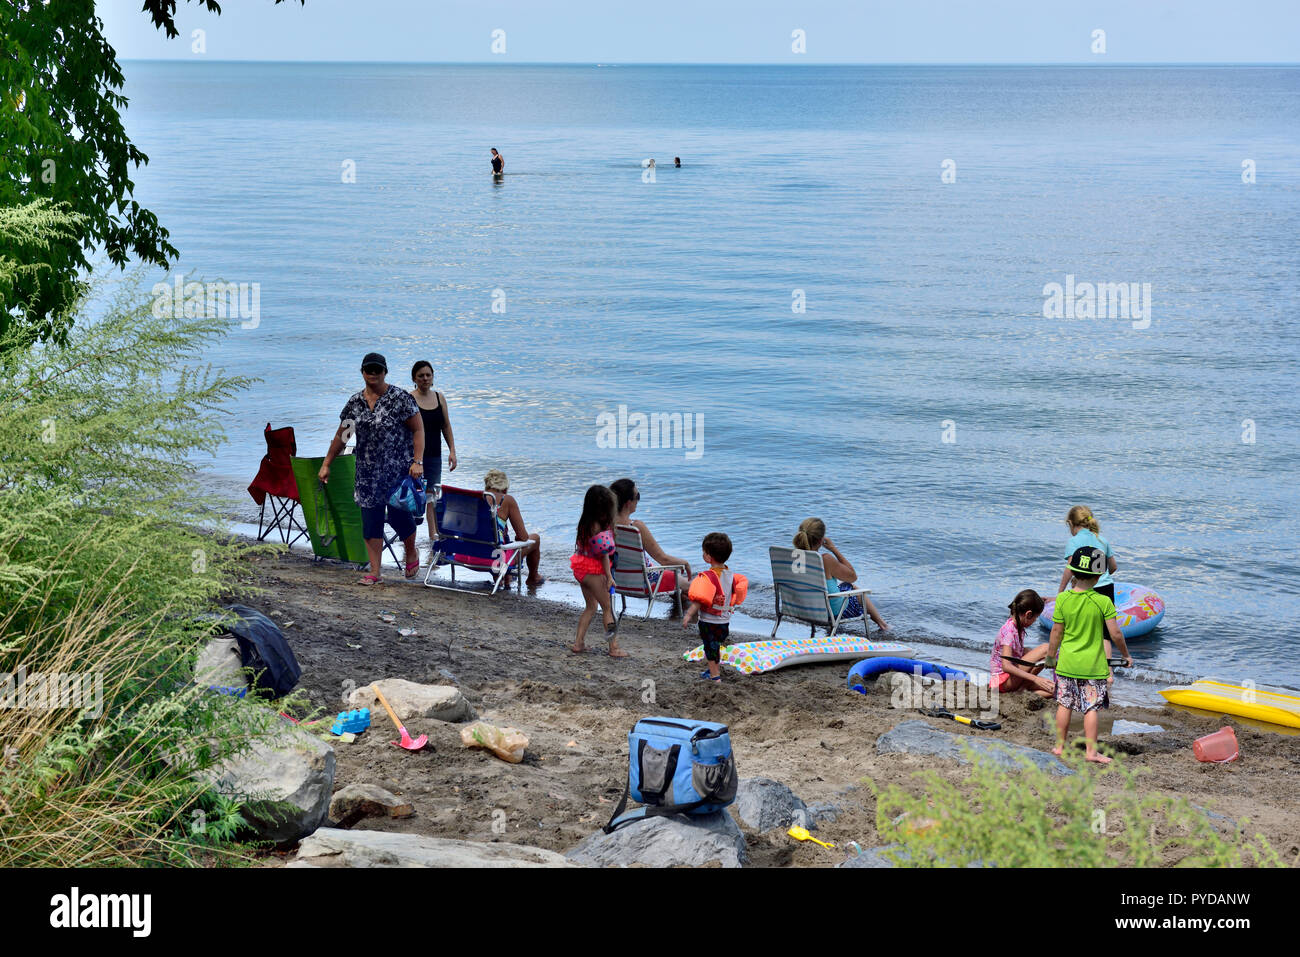 People playing on small beach and in water of  Lake Ontario, New York State, USA Stock Photo